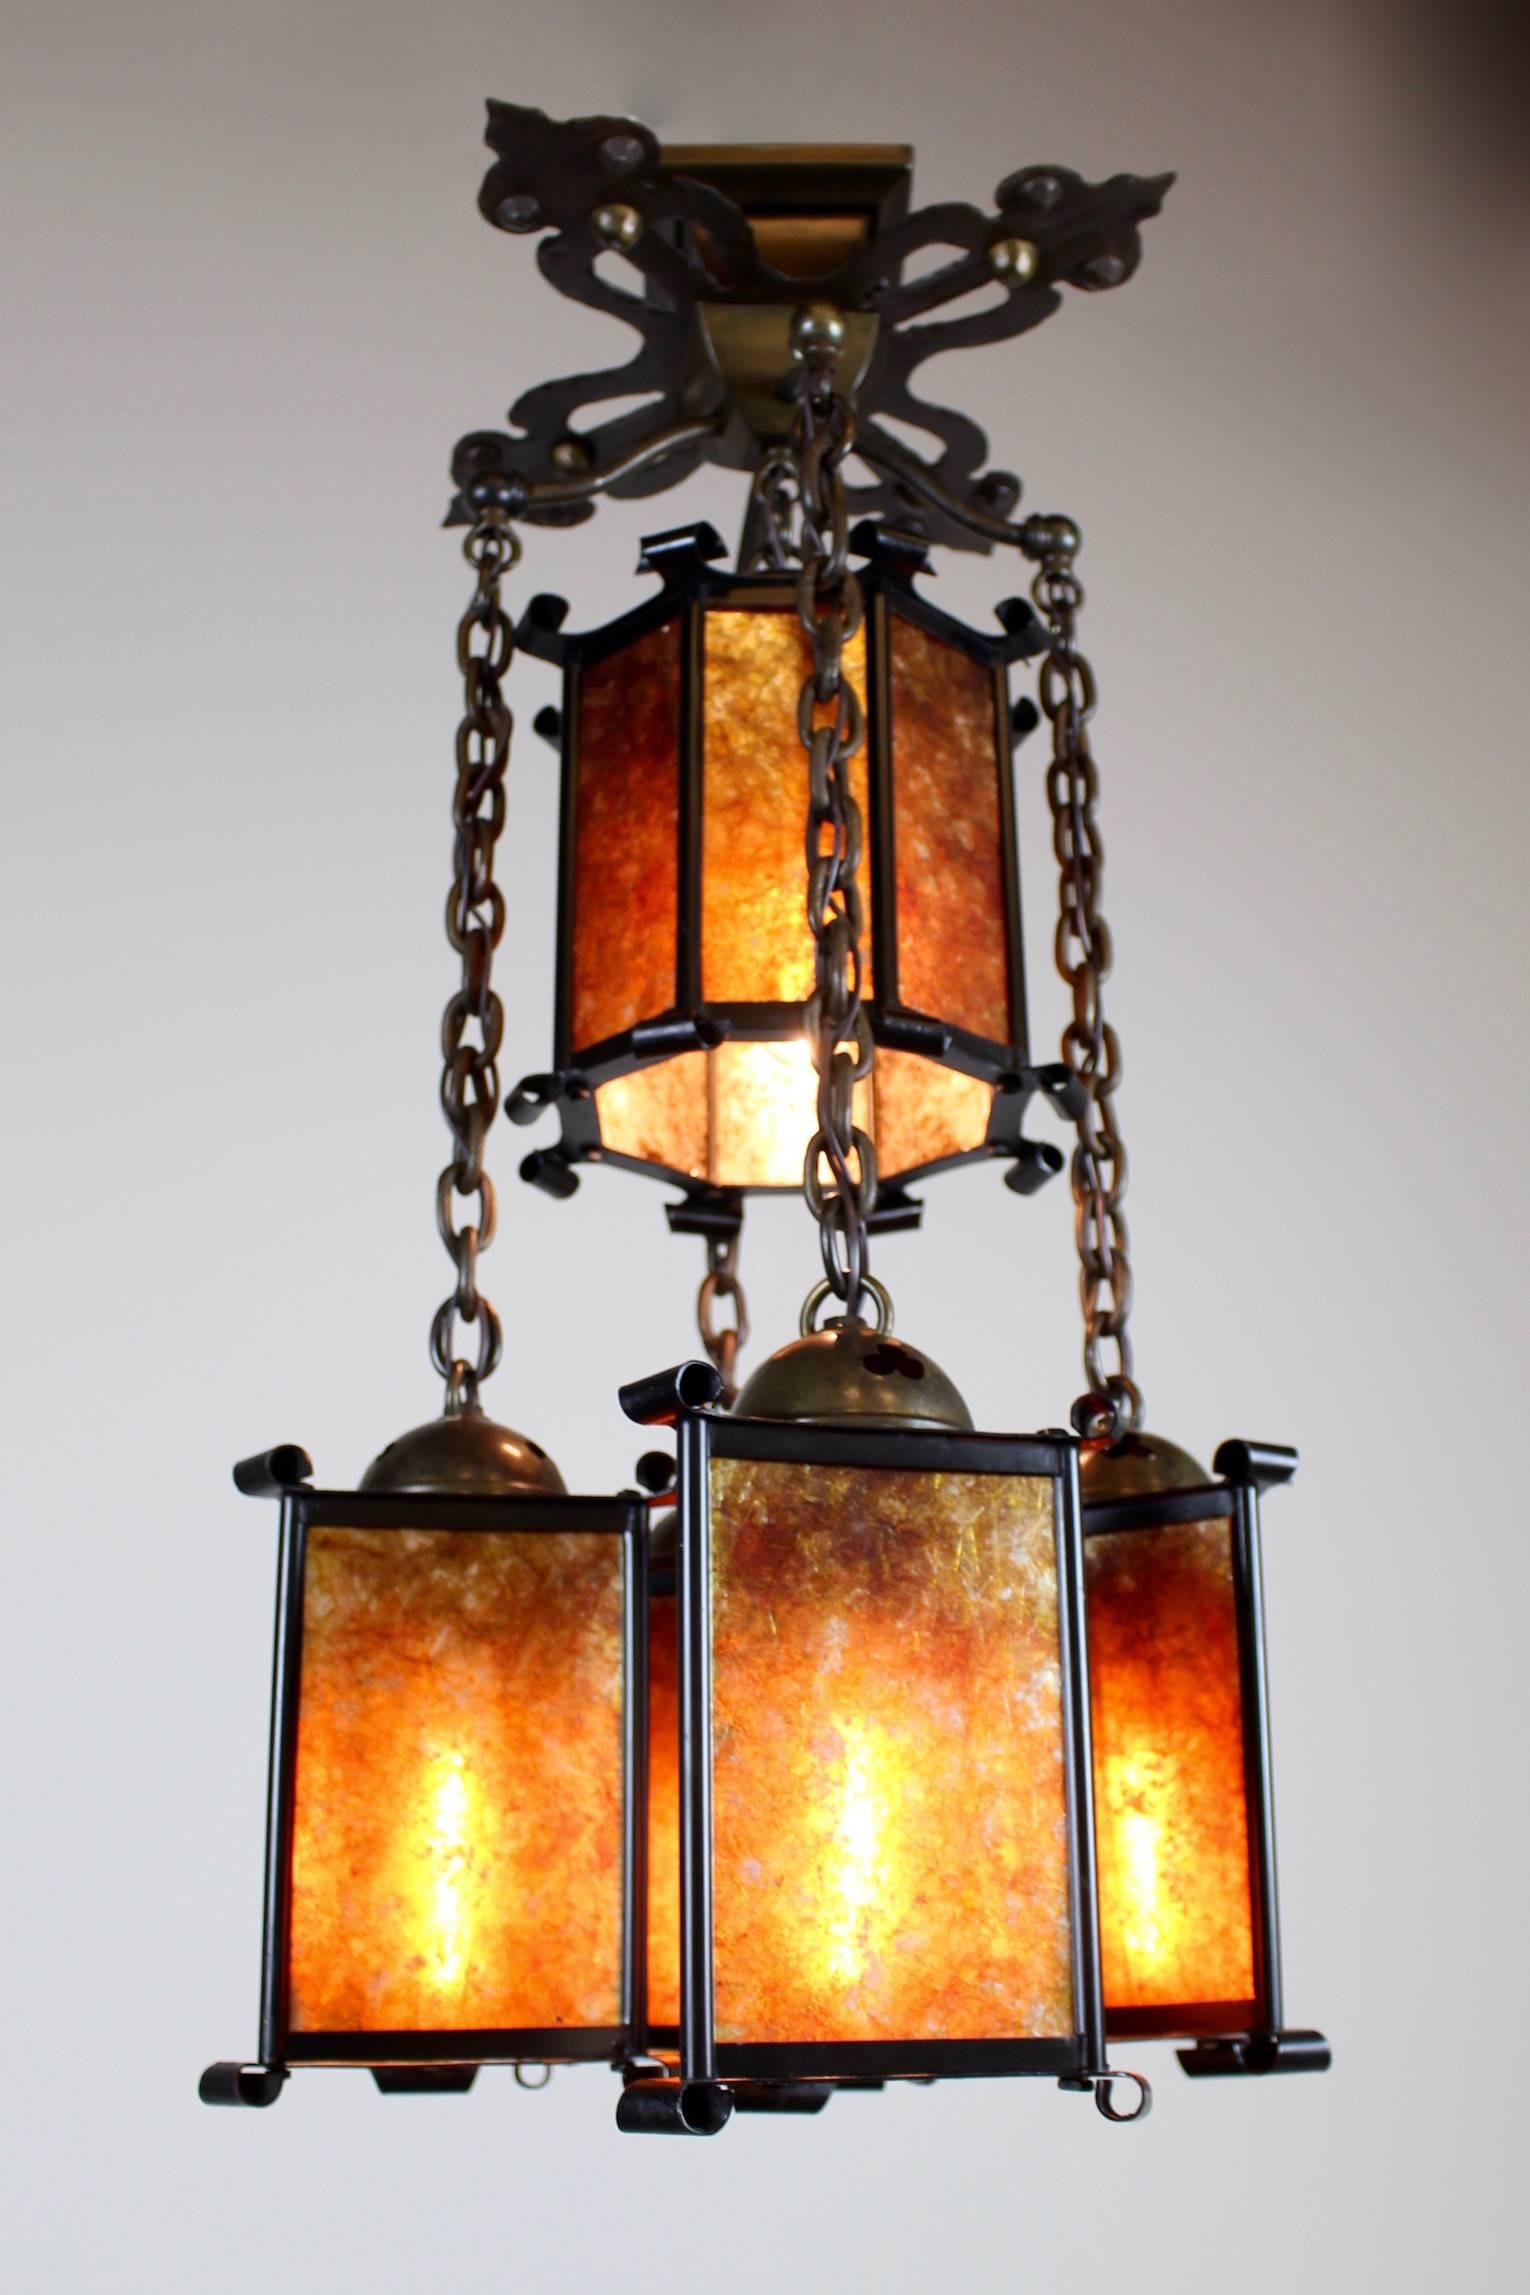 This is a superior flush mount light fixture in the Stickley or California Craftsman style, circa 1910. Featuring curled brass corner edges and cut-out details. It has been fitted with mica for a period correct warm amber glow. This five light